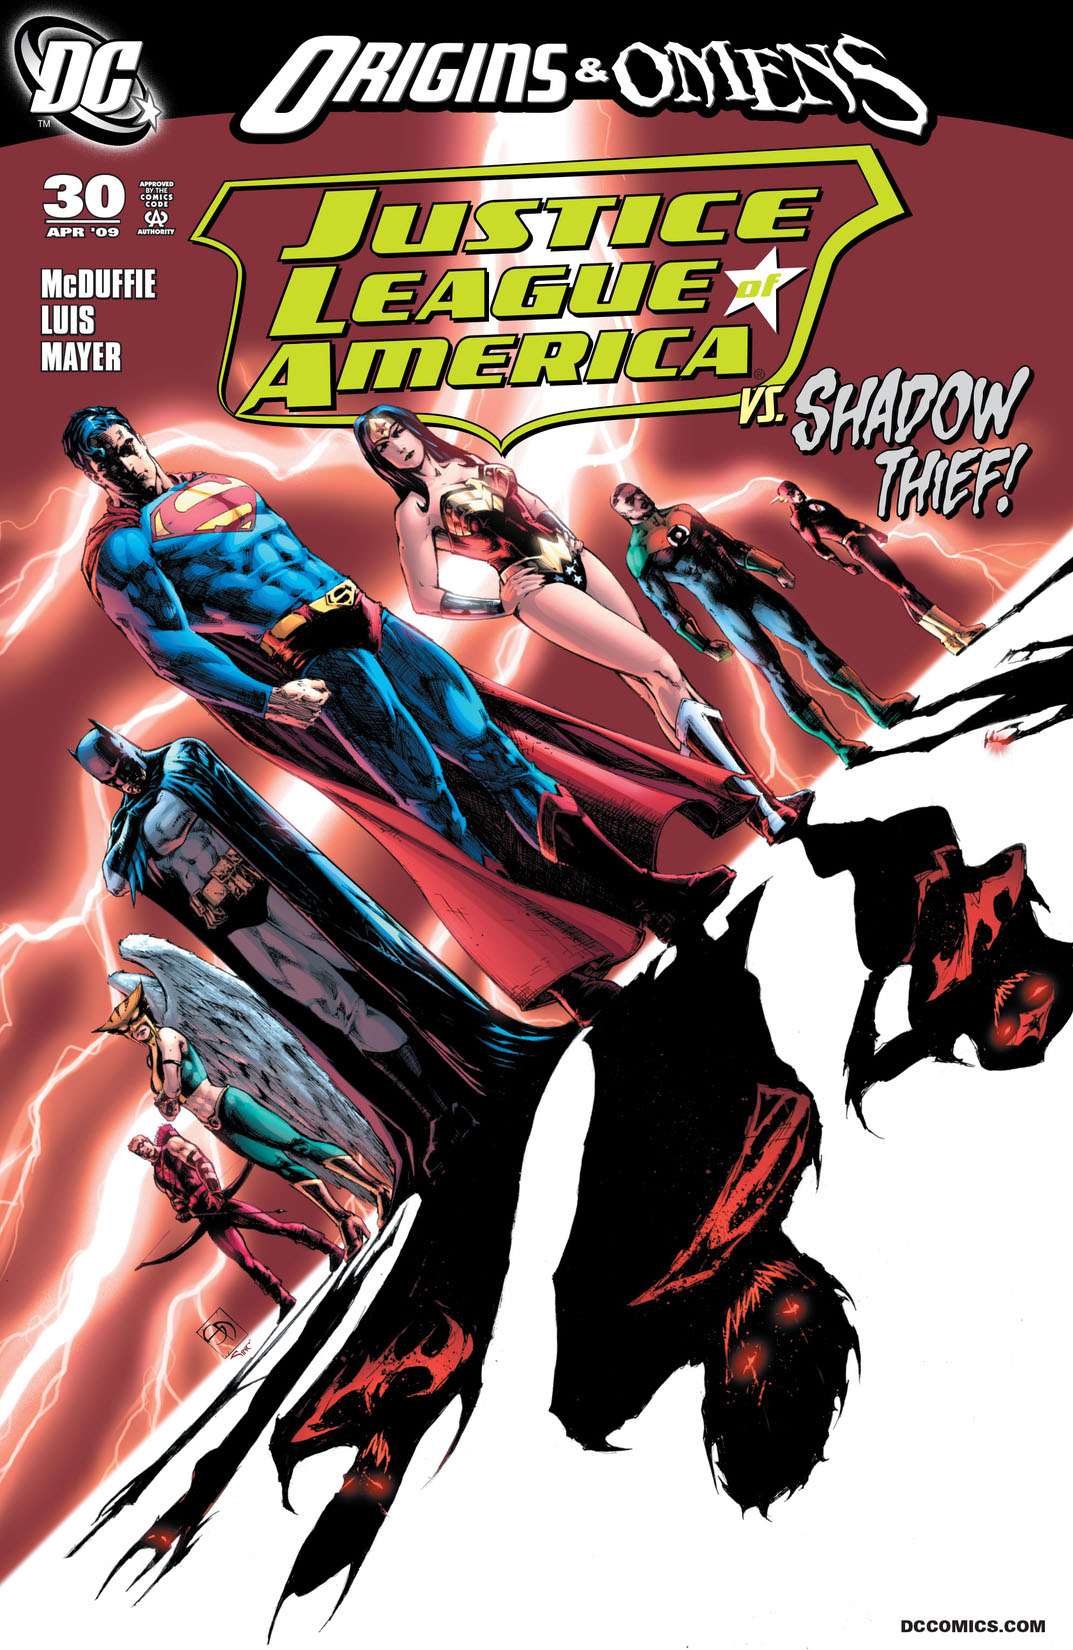 Justice League of America (2006-) #30 preview images